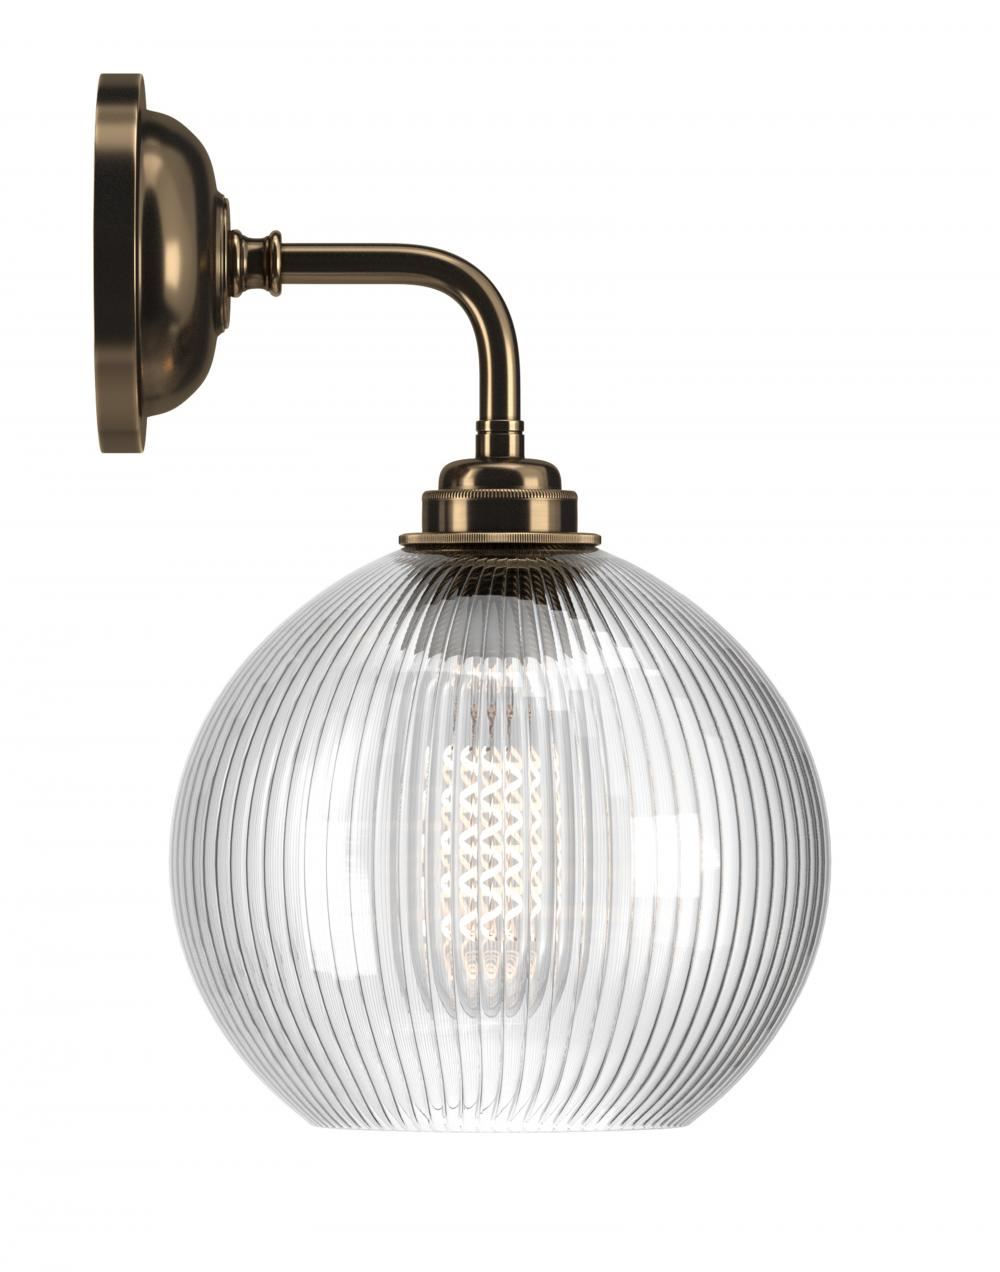 Hereford Globe Wall Light Skinny Ribbed Antique Brass